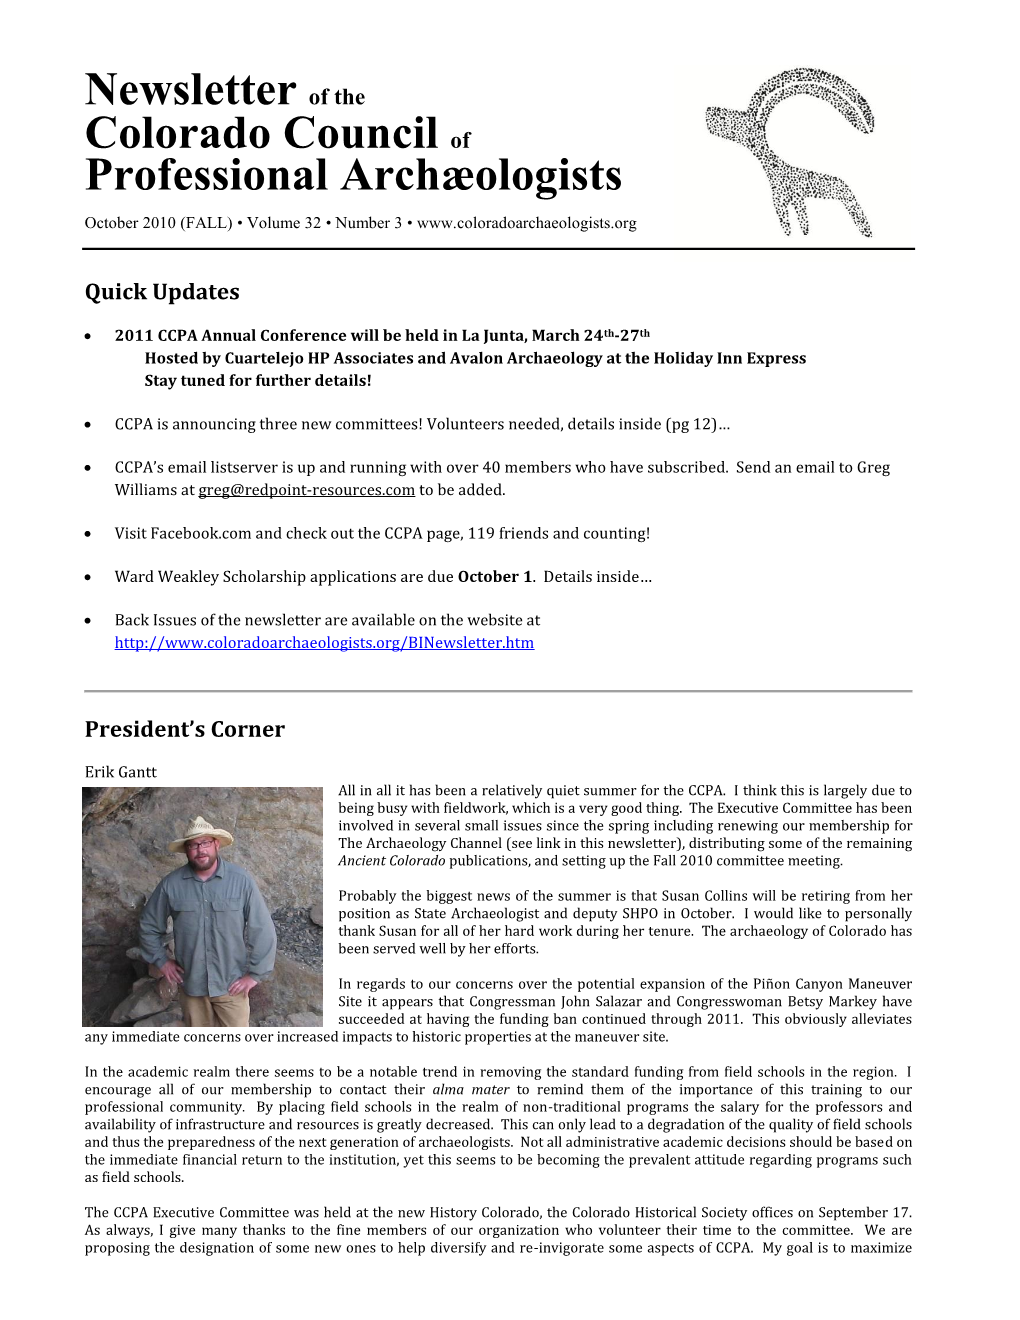 Newsletter of the Colorado Council of Professional Archæologists